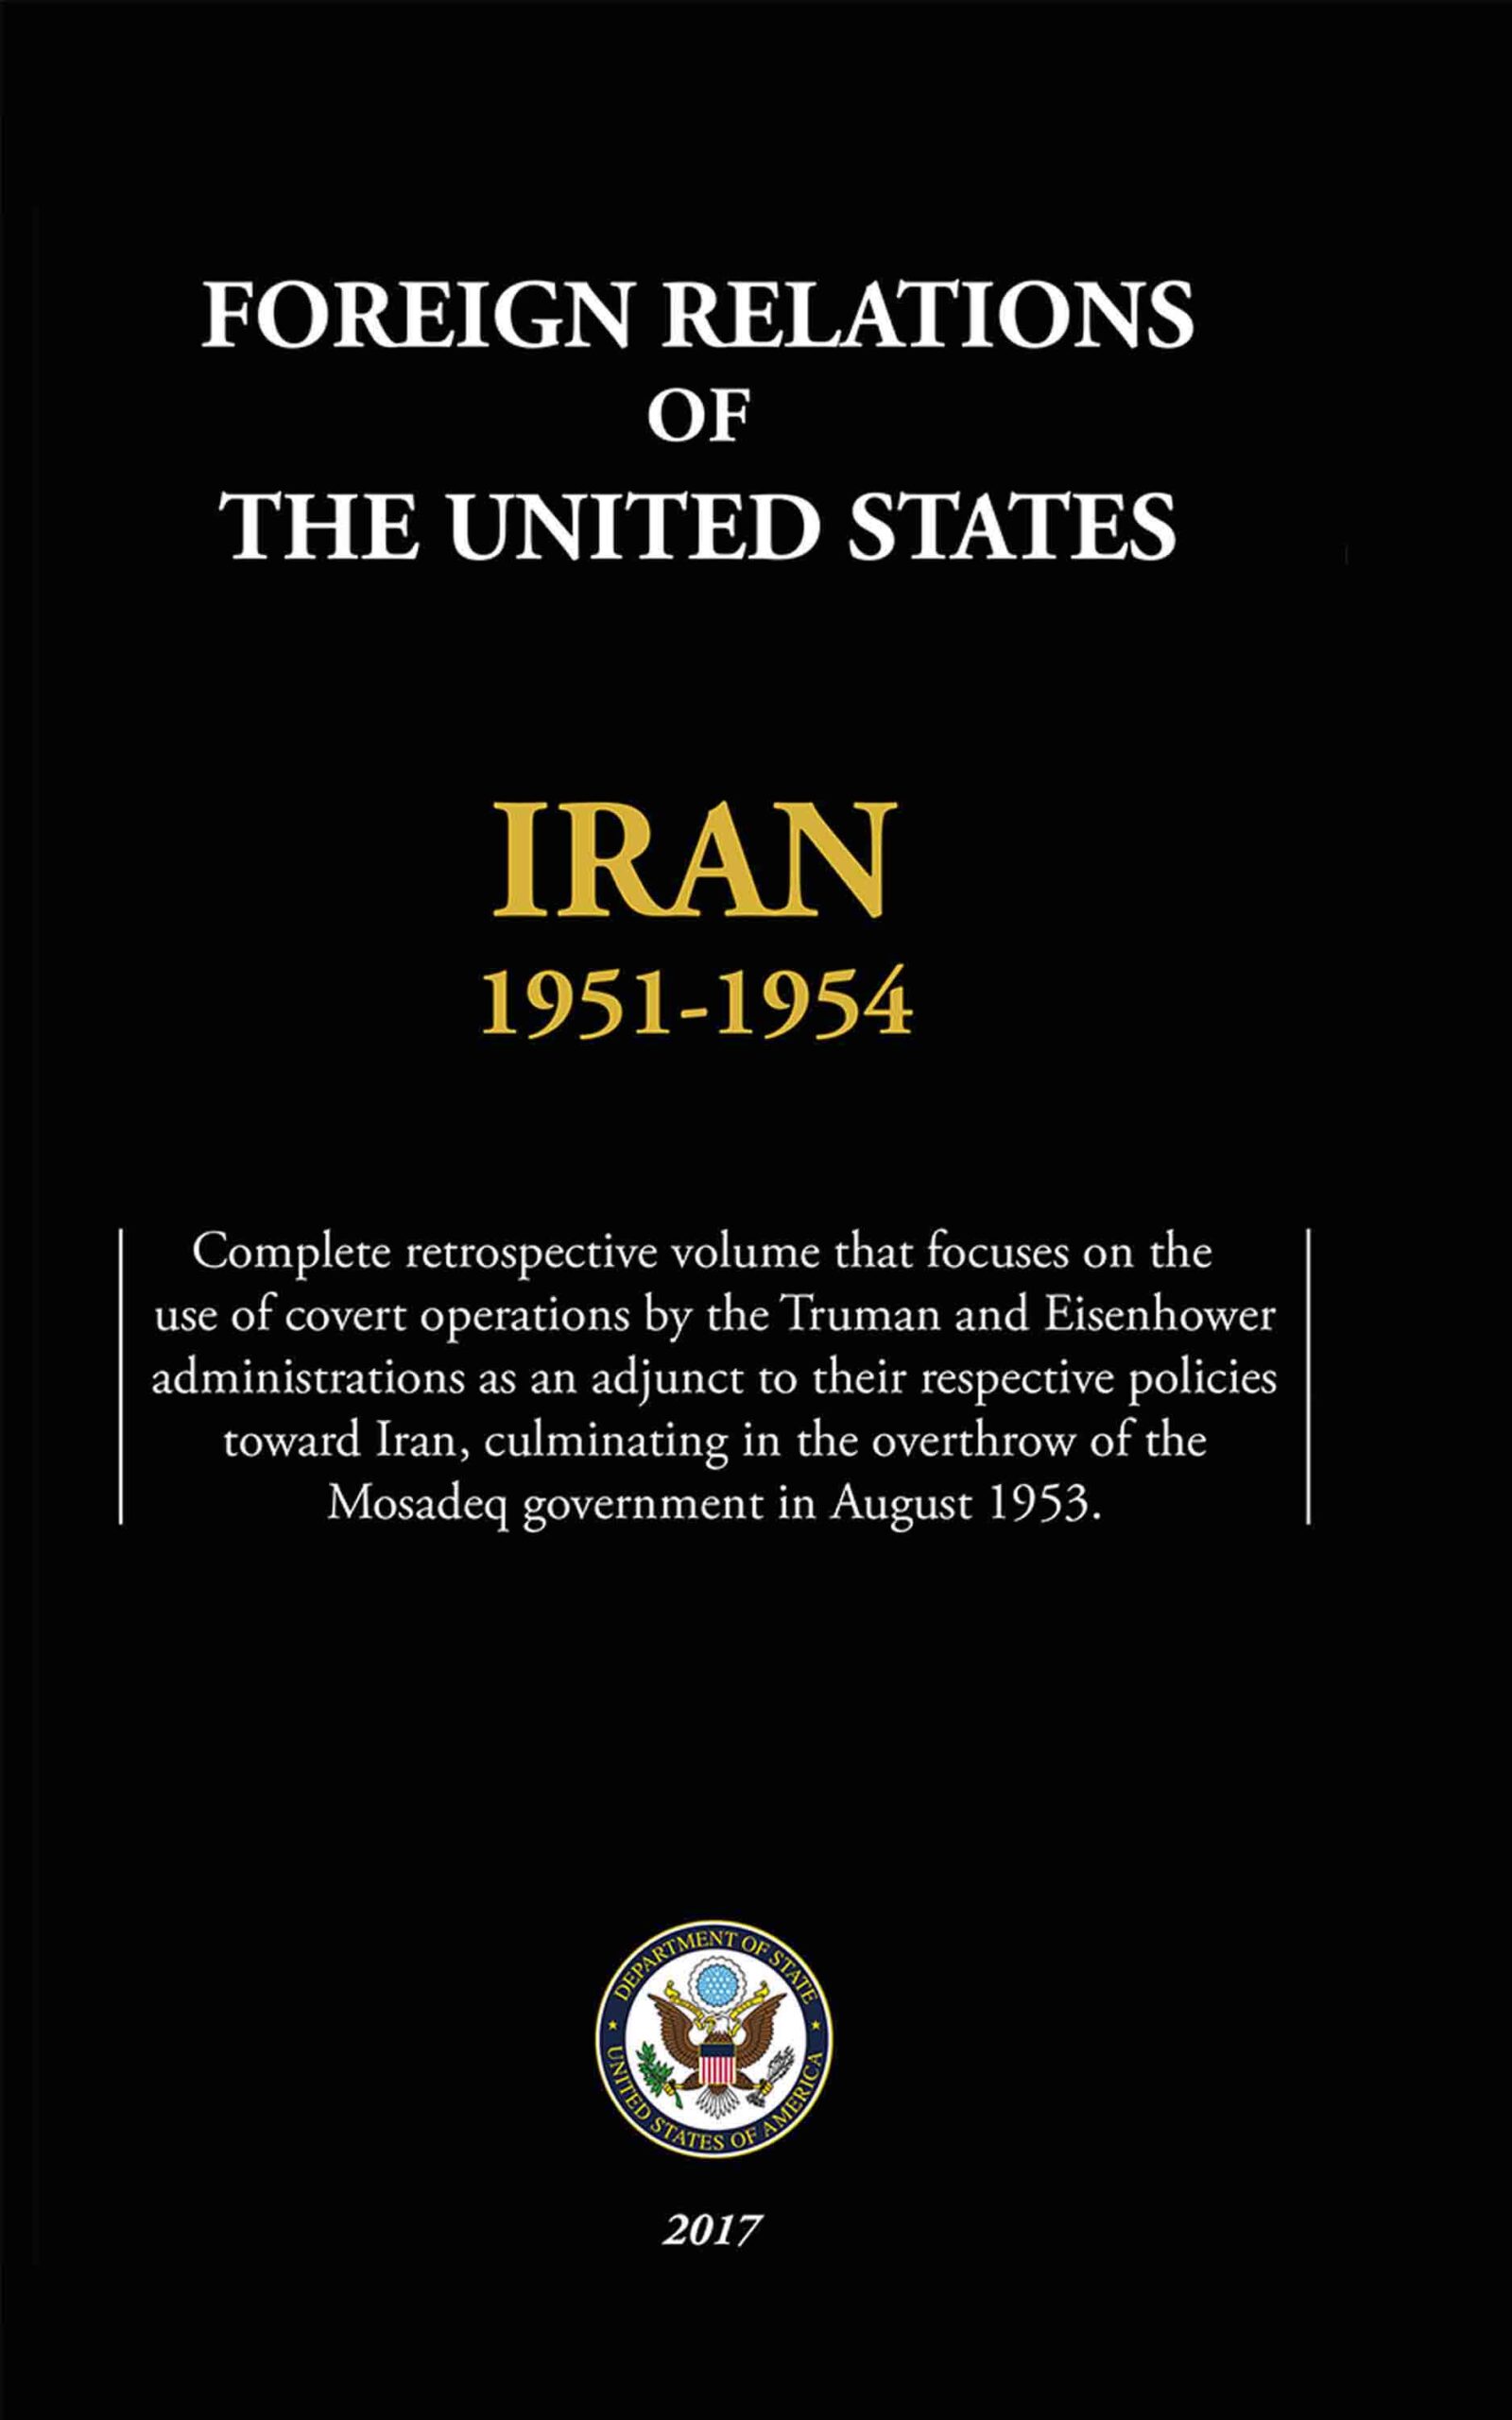 FOREIGN RELATIONS OF THE UNITED STATES – IRAN, 1951-1954